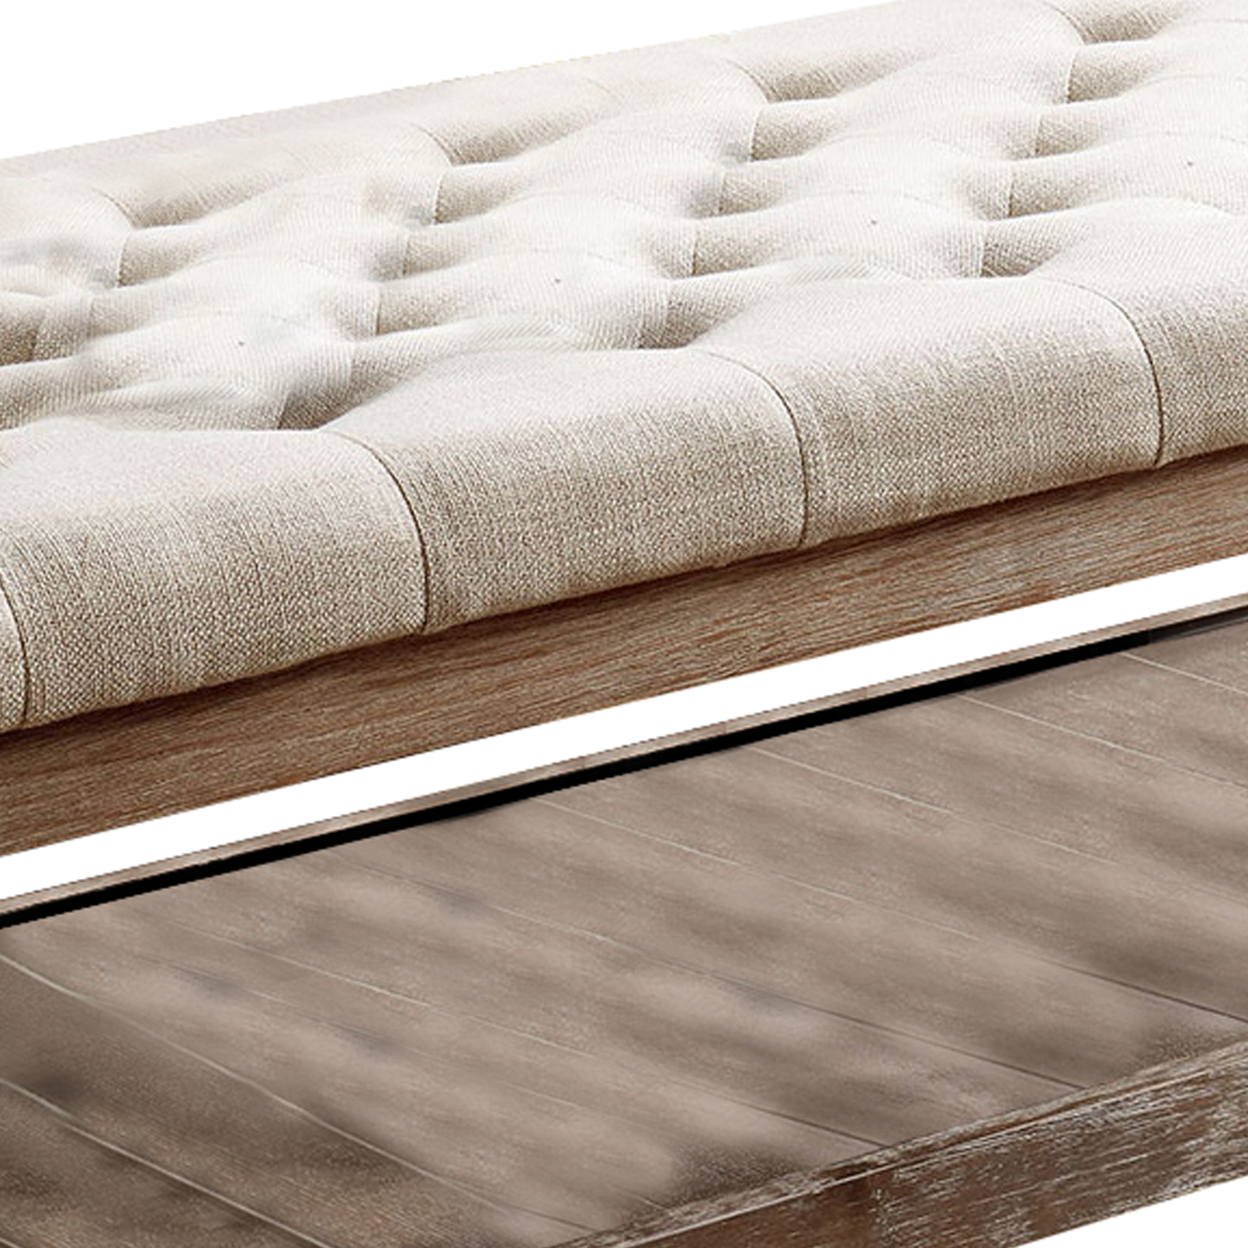 Button Tufted Fabric Upholstered Bench With Bottom Shelf, Beige And Brown- Saltoro Sherpi